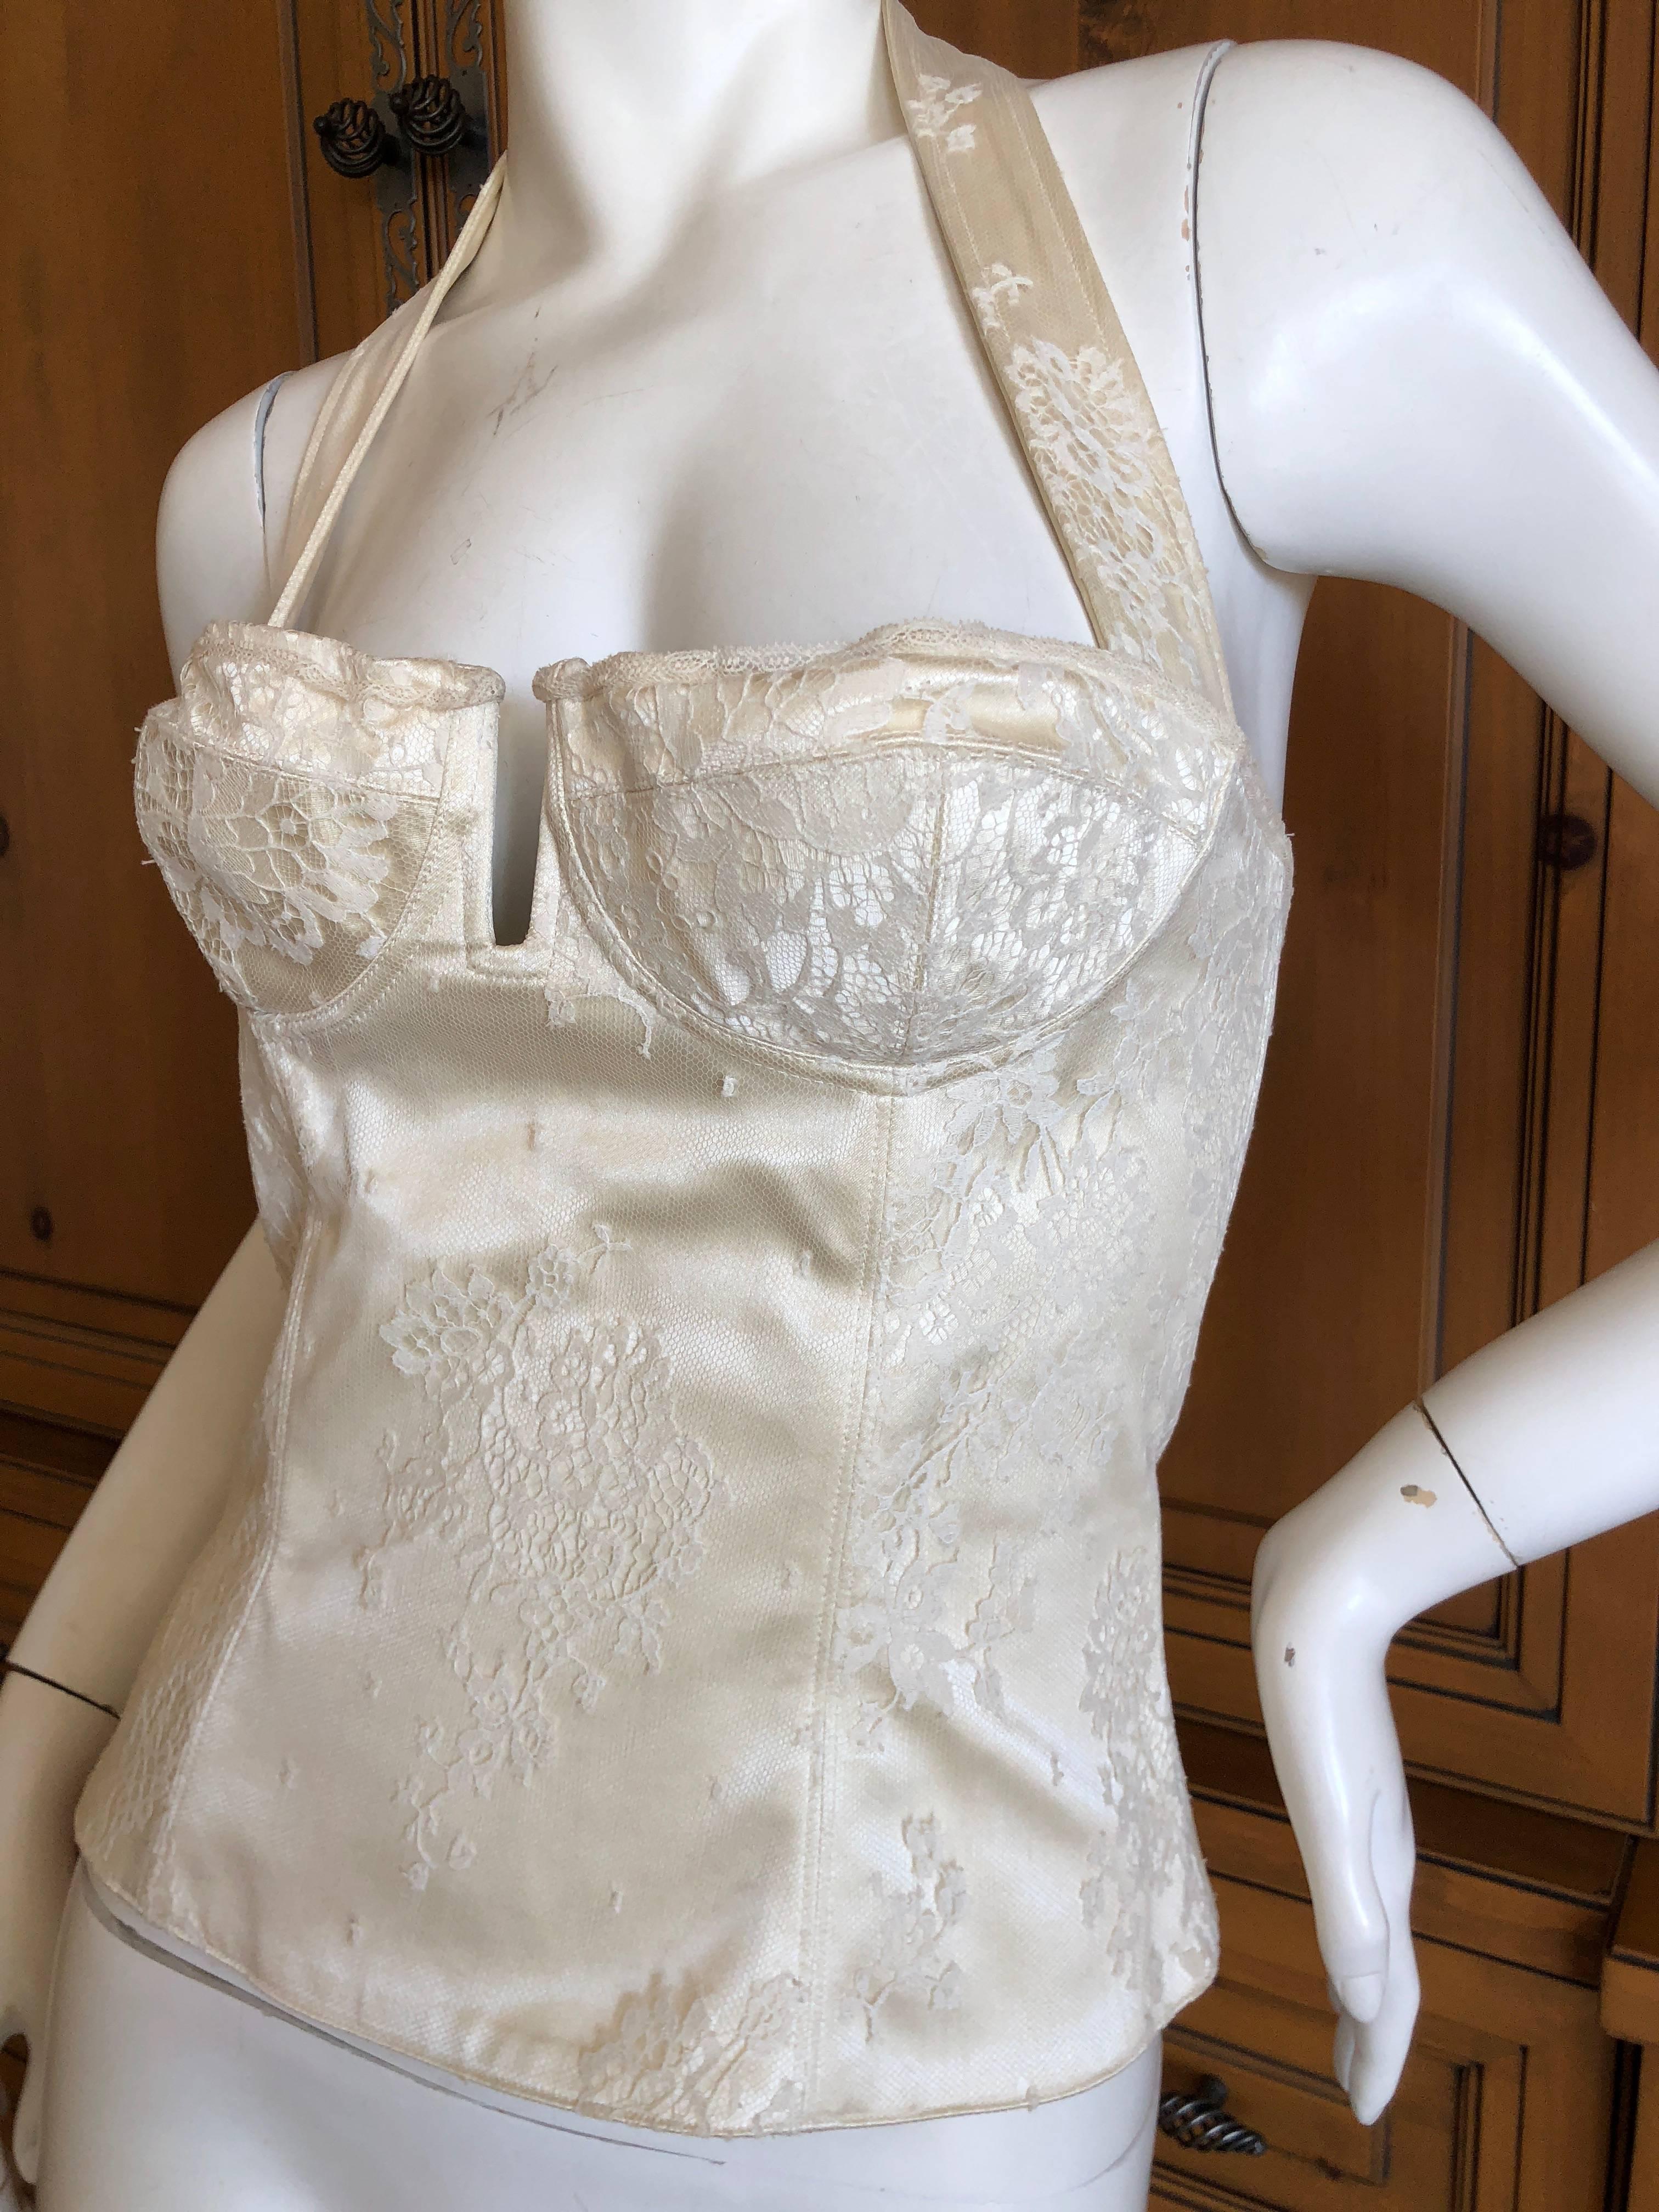 Women's Christian Dior Spring 2004 by John Galliano Vintage Lace Overlay Corset Bustier